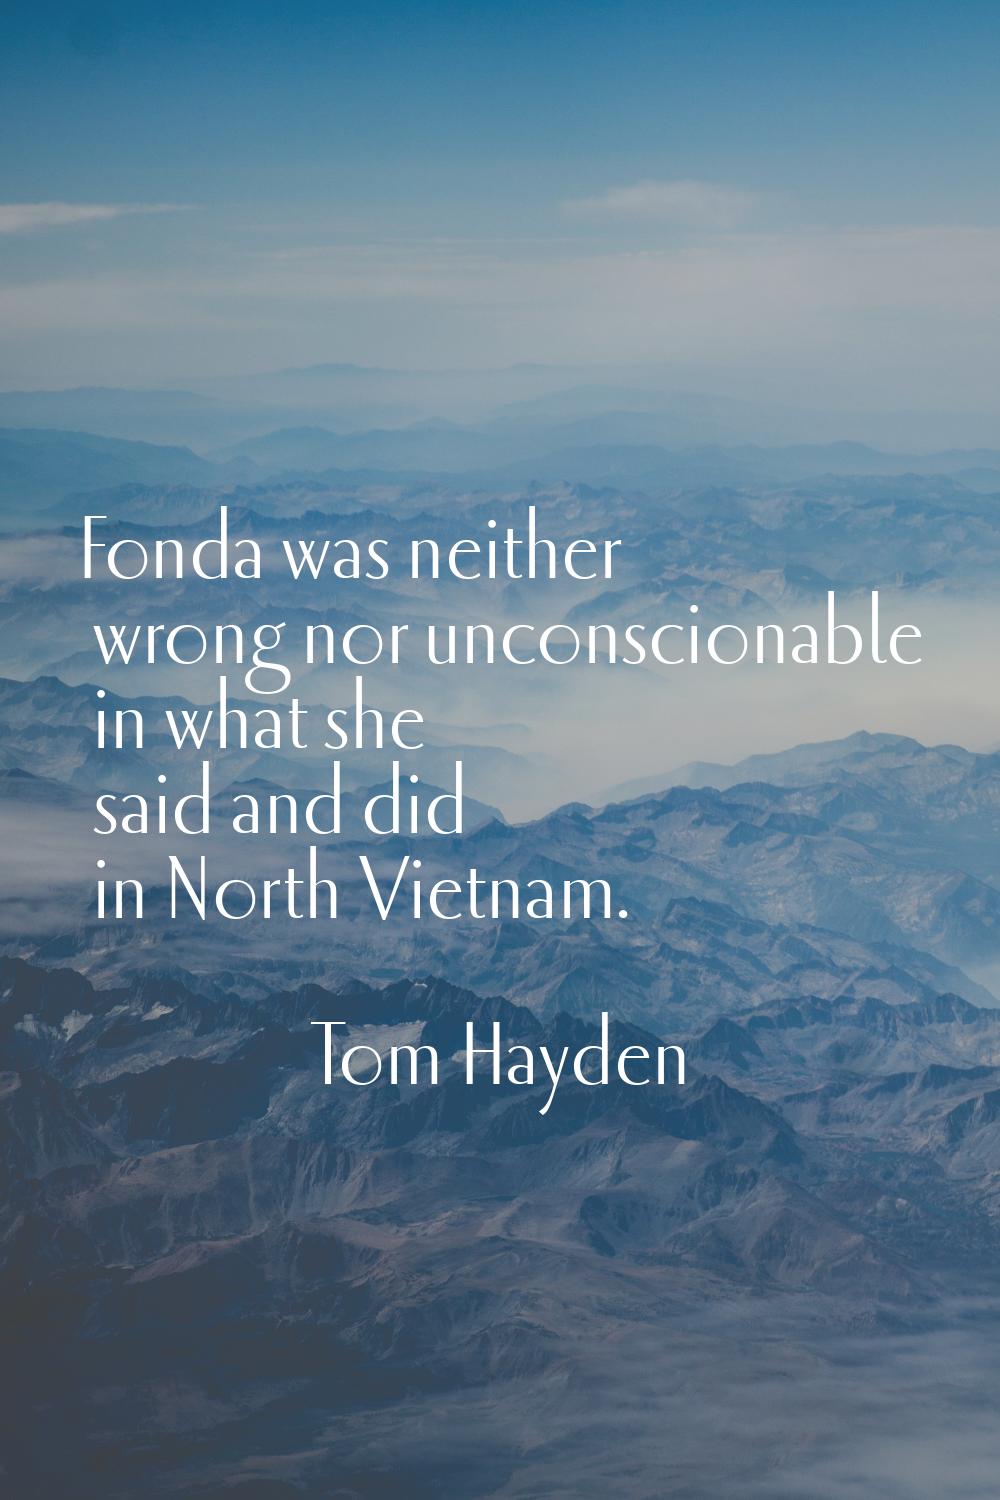 Fonda was neither wrong nor unconscionable in what she said and did in North Vietnam.